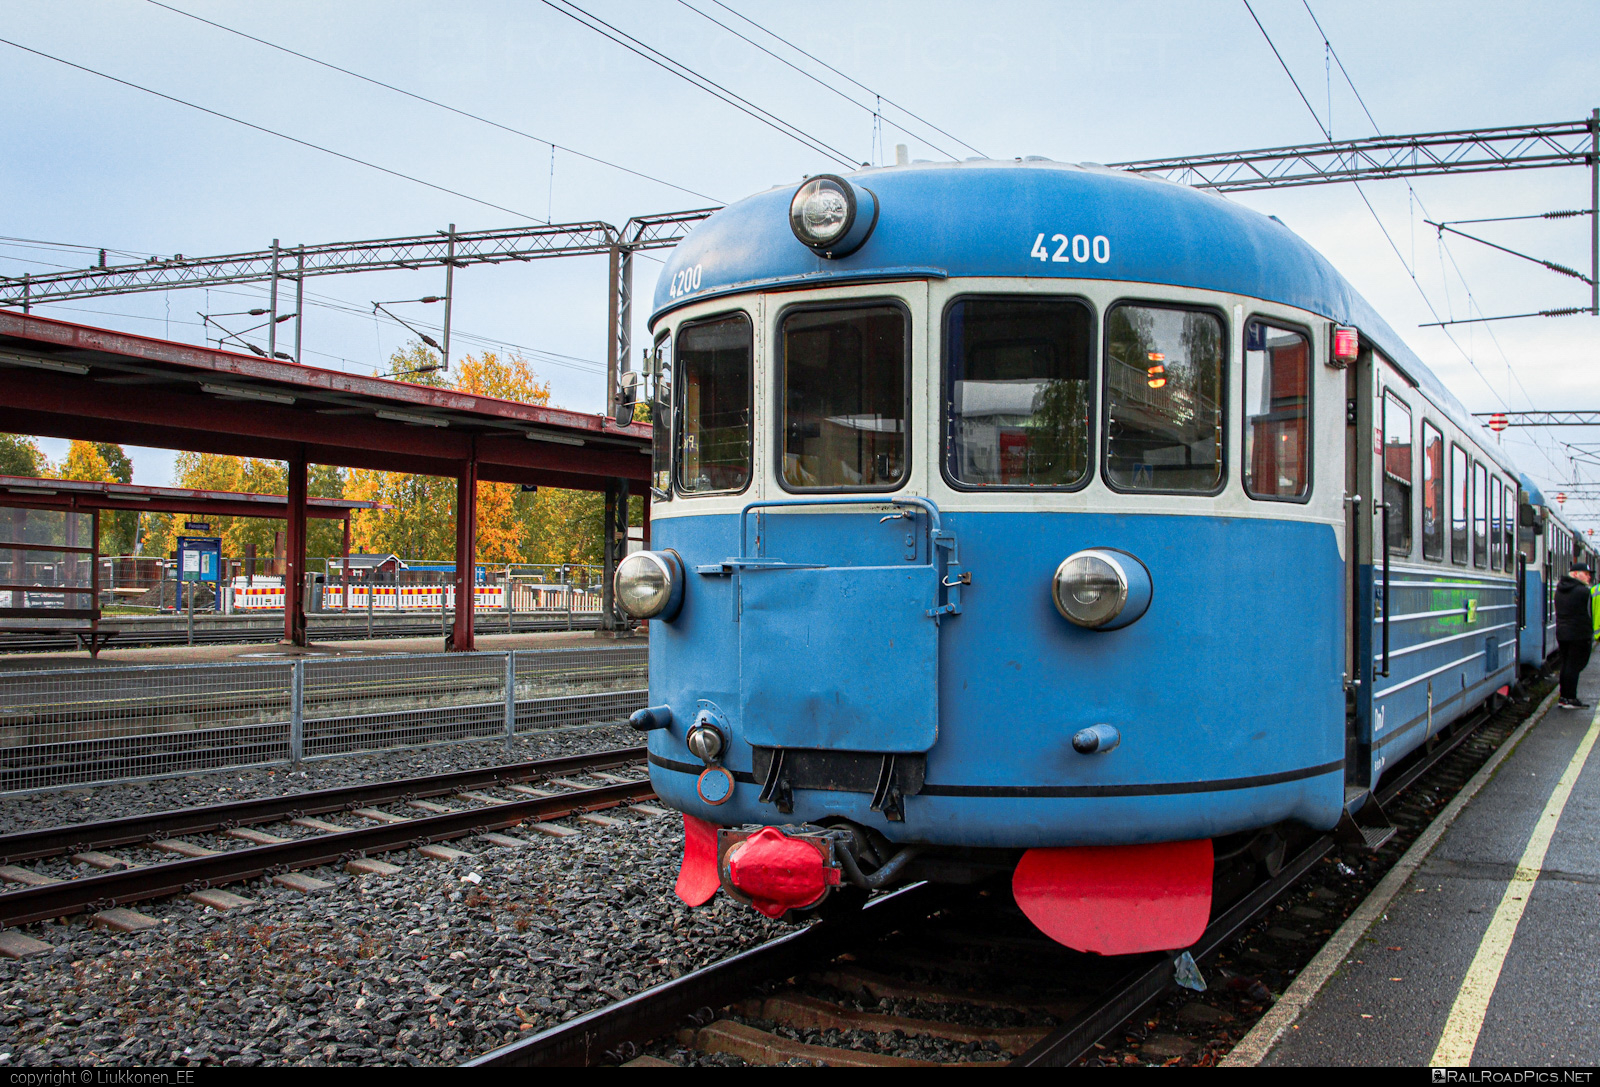 Valmet VR Class Dm7 - 4200 operated by Keitele-Museo OY #Valmet #keitelemuseo #lattahattu #valmetDm7 #vrClassDm7